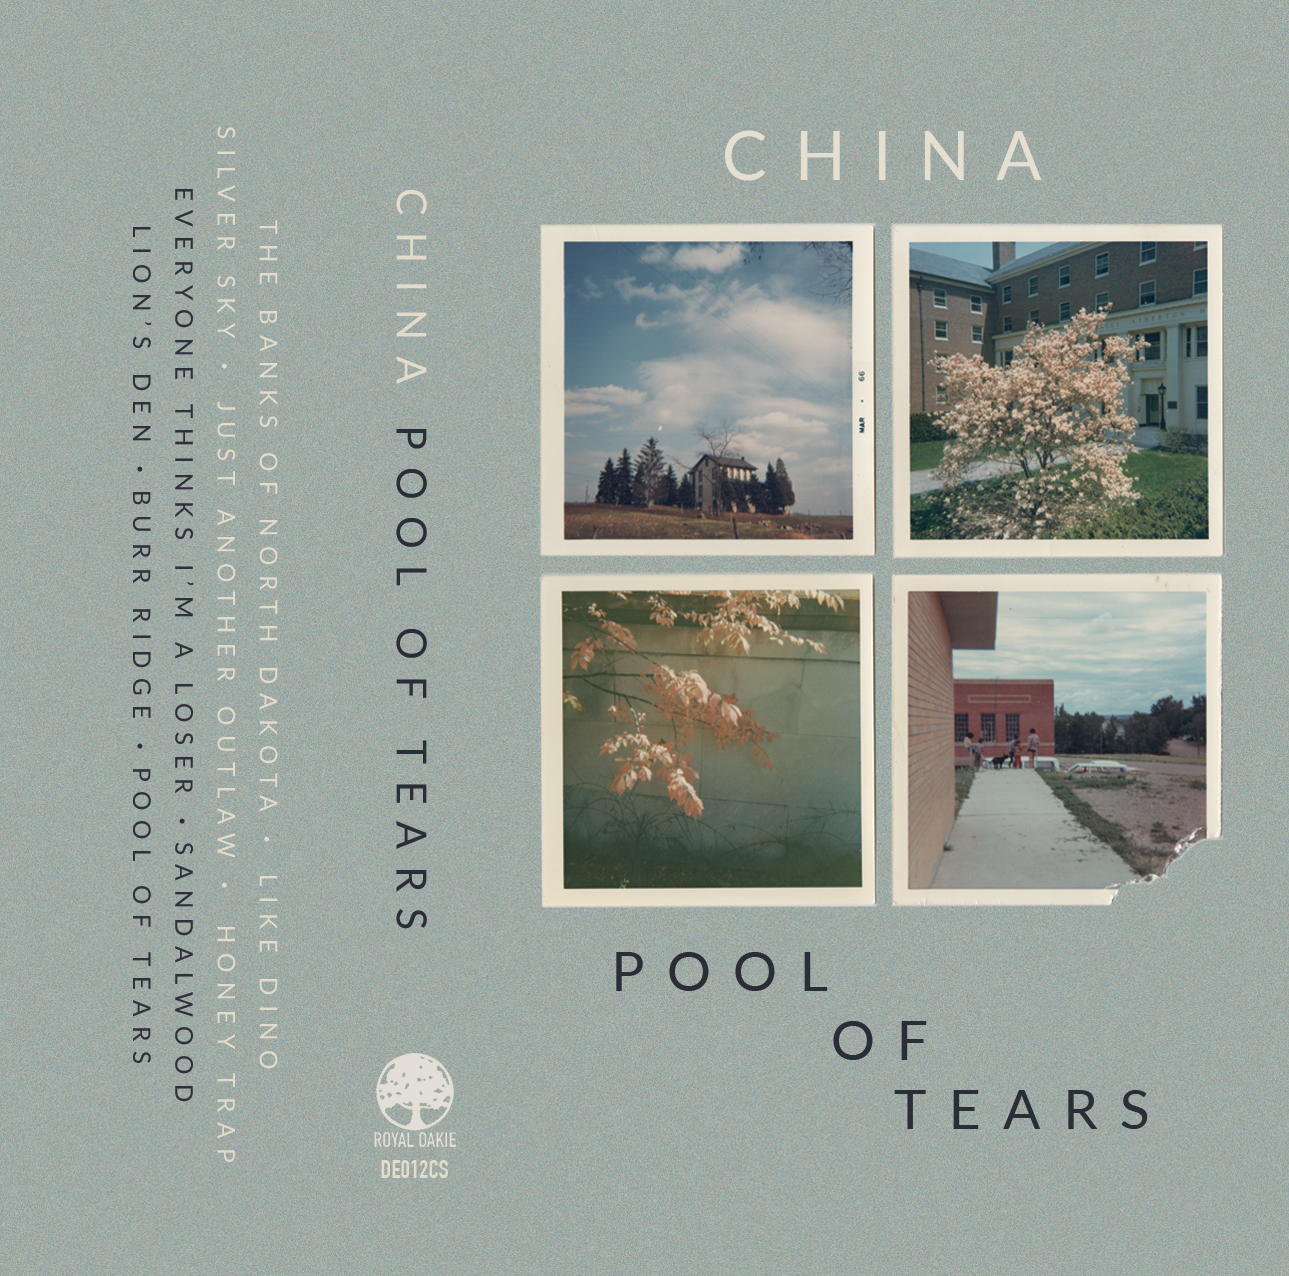 "Pool Of Tears" by China